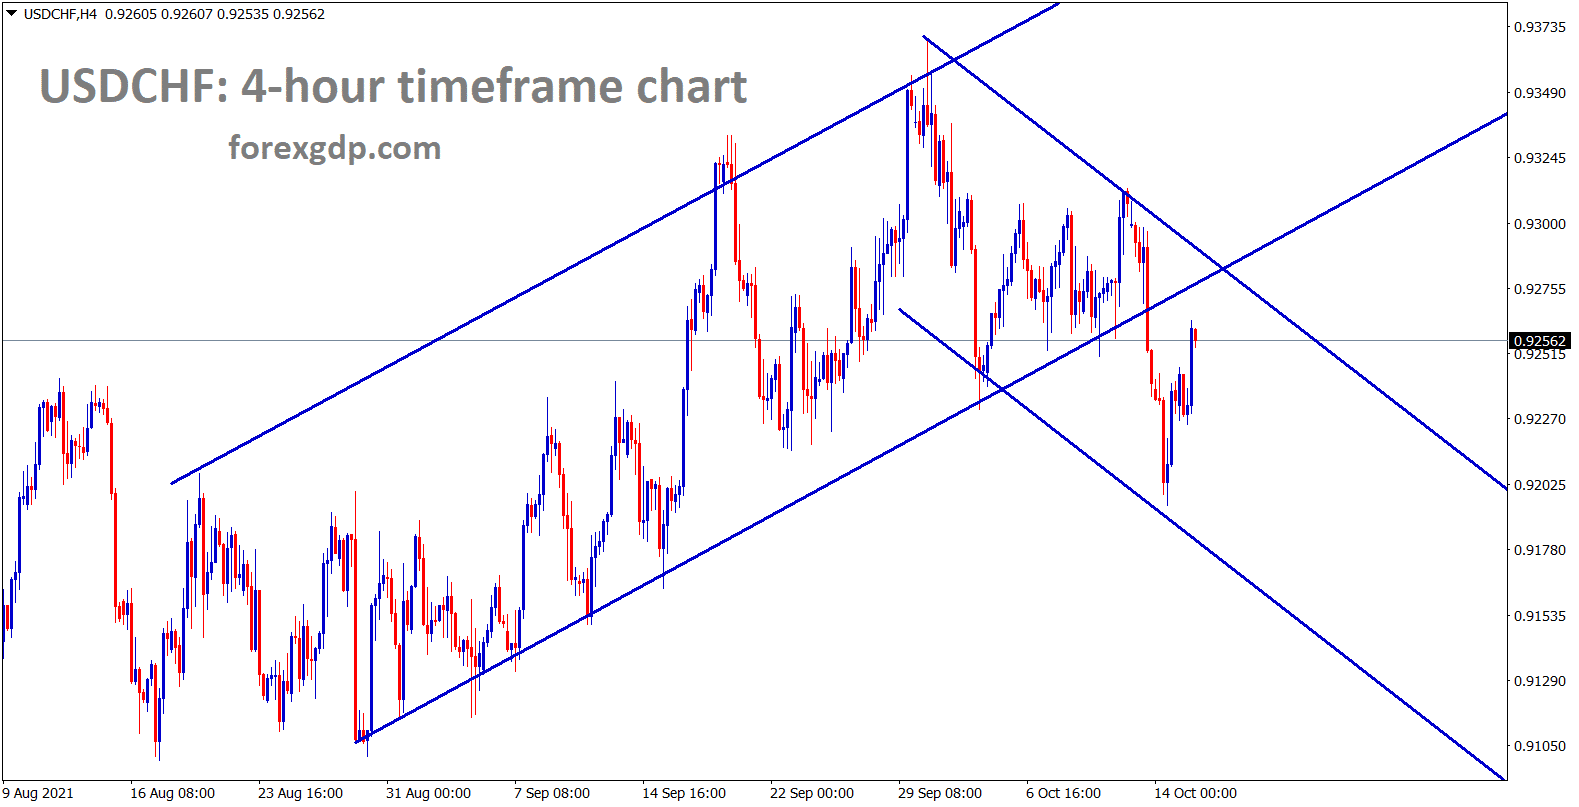 USDCHF is going towards the retest area and the lower high of the descending channel